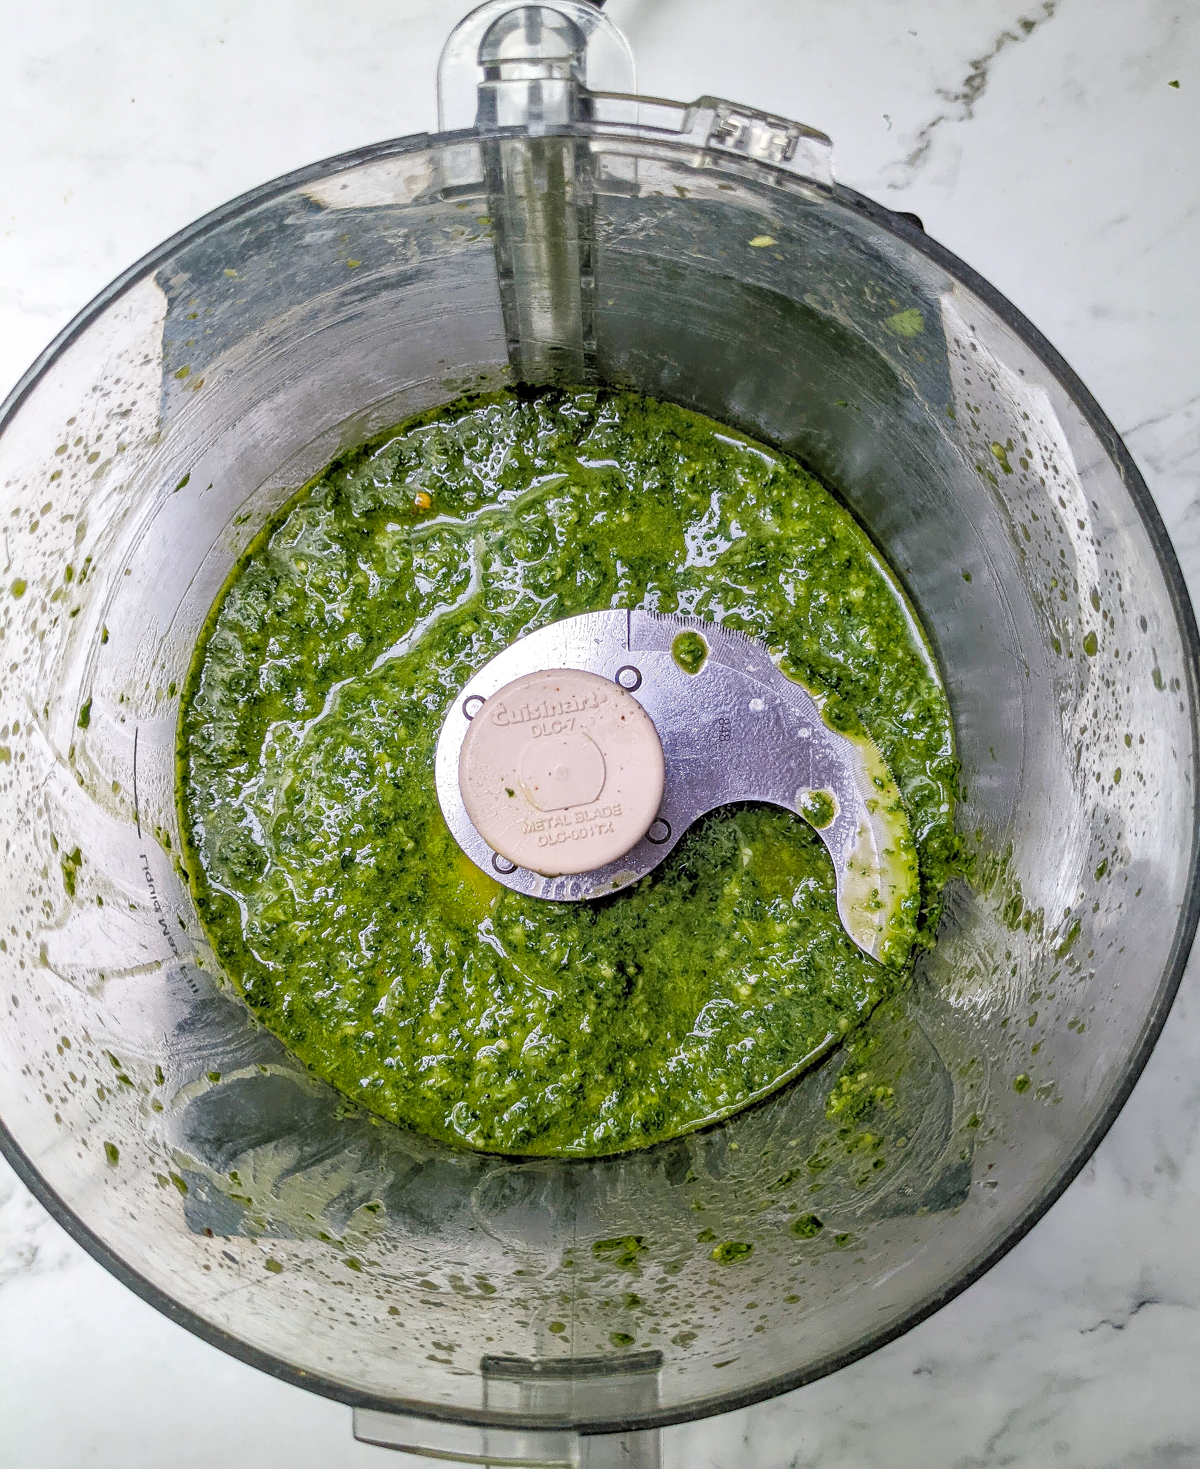 Overheaed view of chimichurri sauce in food processor.